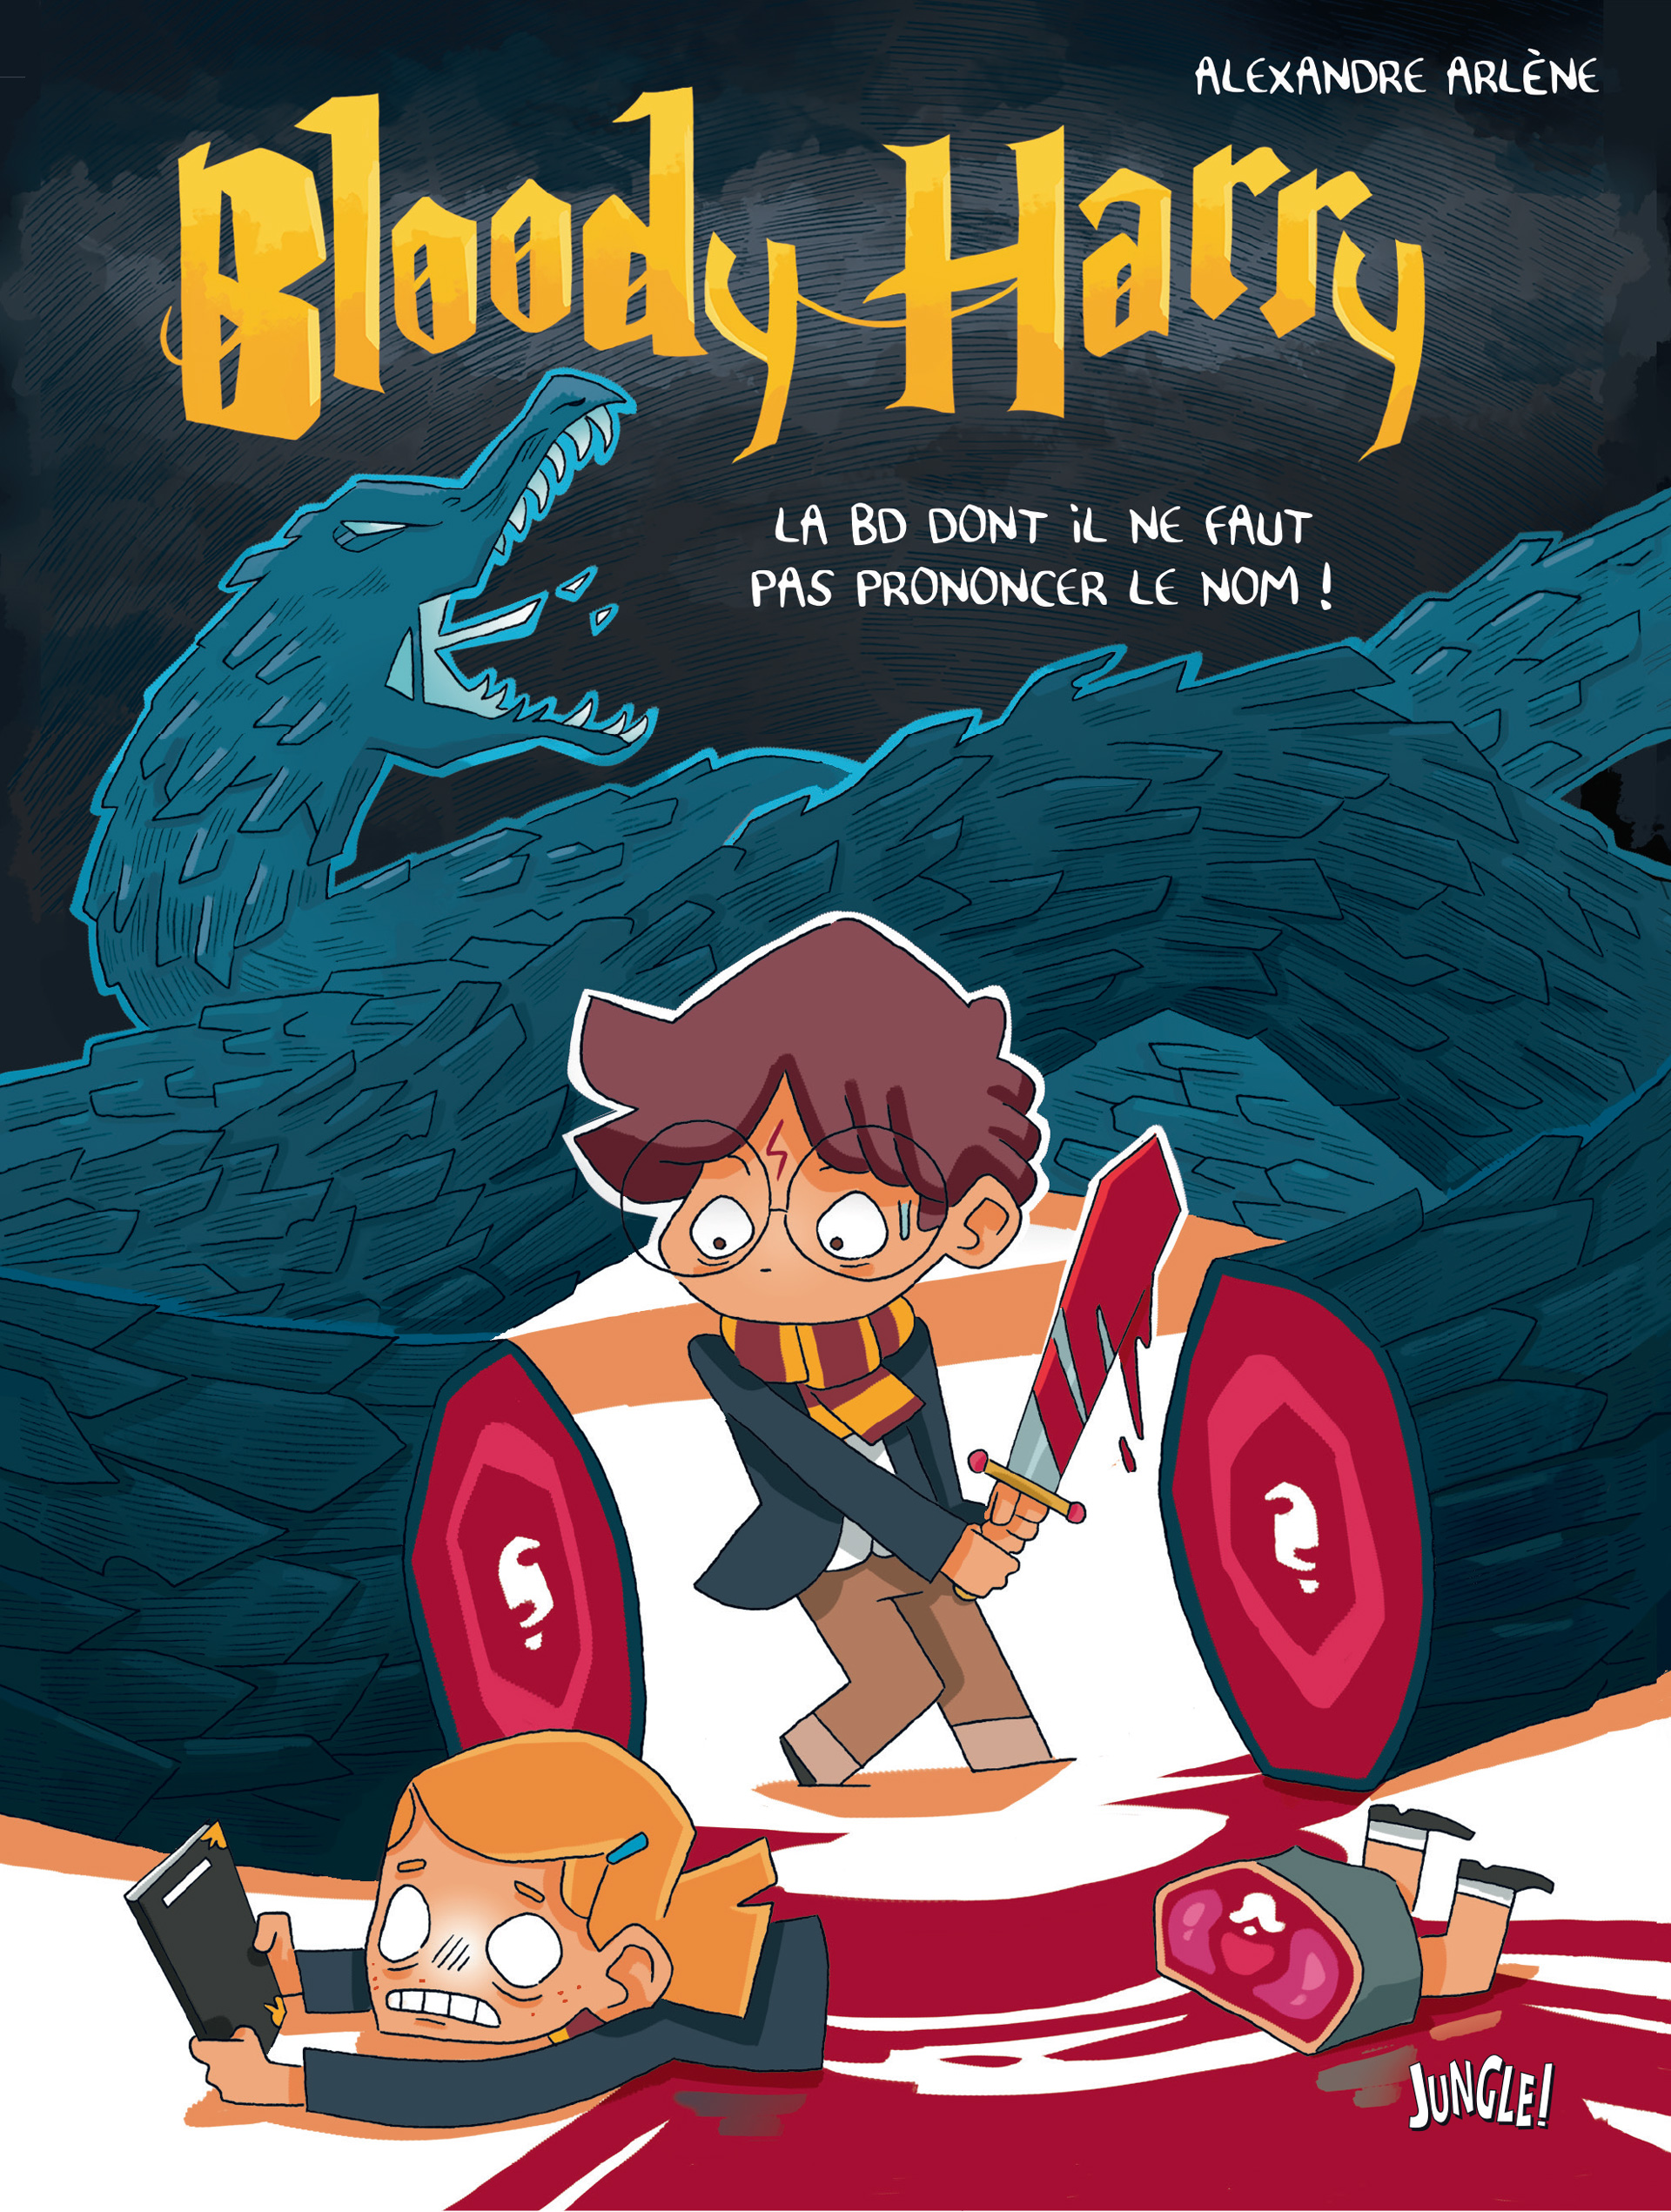 Bloody Harry (tome 3) - (Alexandre Arlène) - Humour [CANAL-BD]